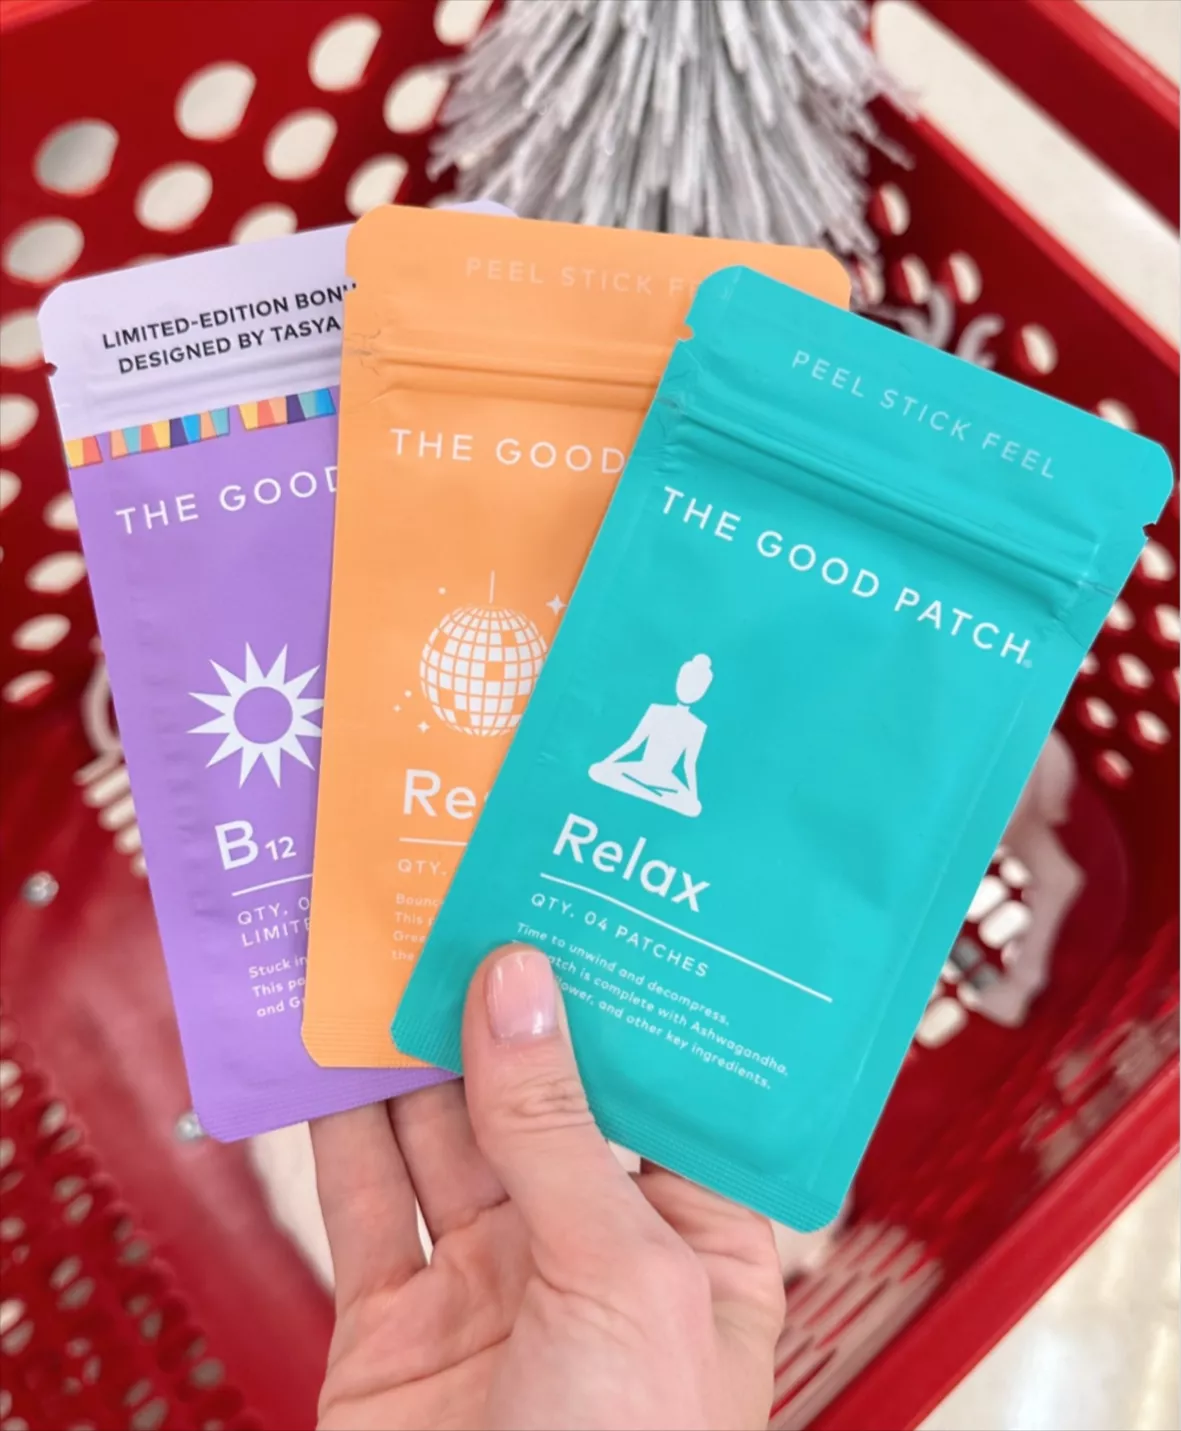 The Good Patch Relief Plant-based Vegan Wellness Patch - 4ct : Target